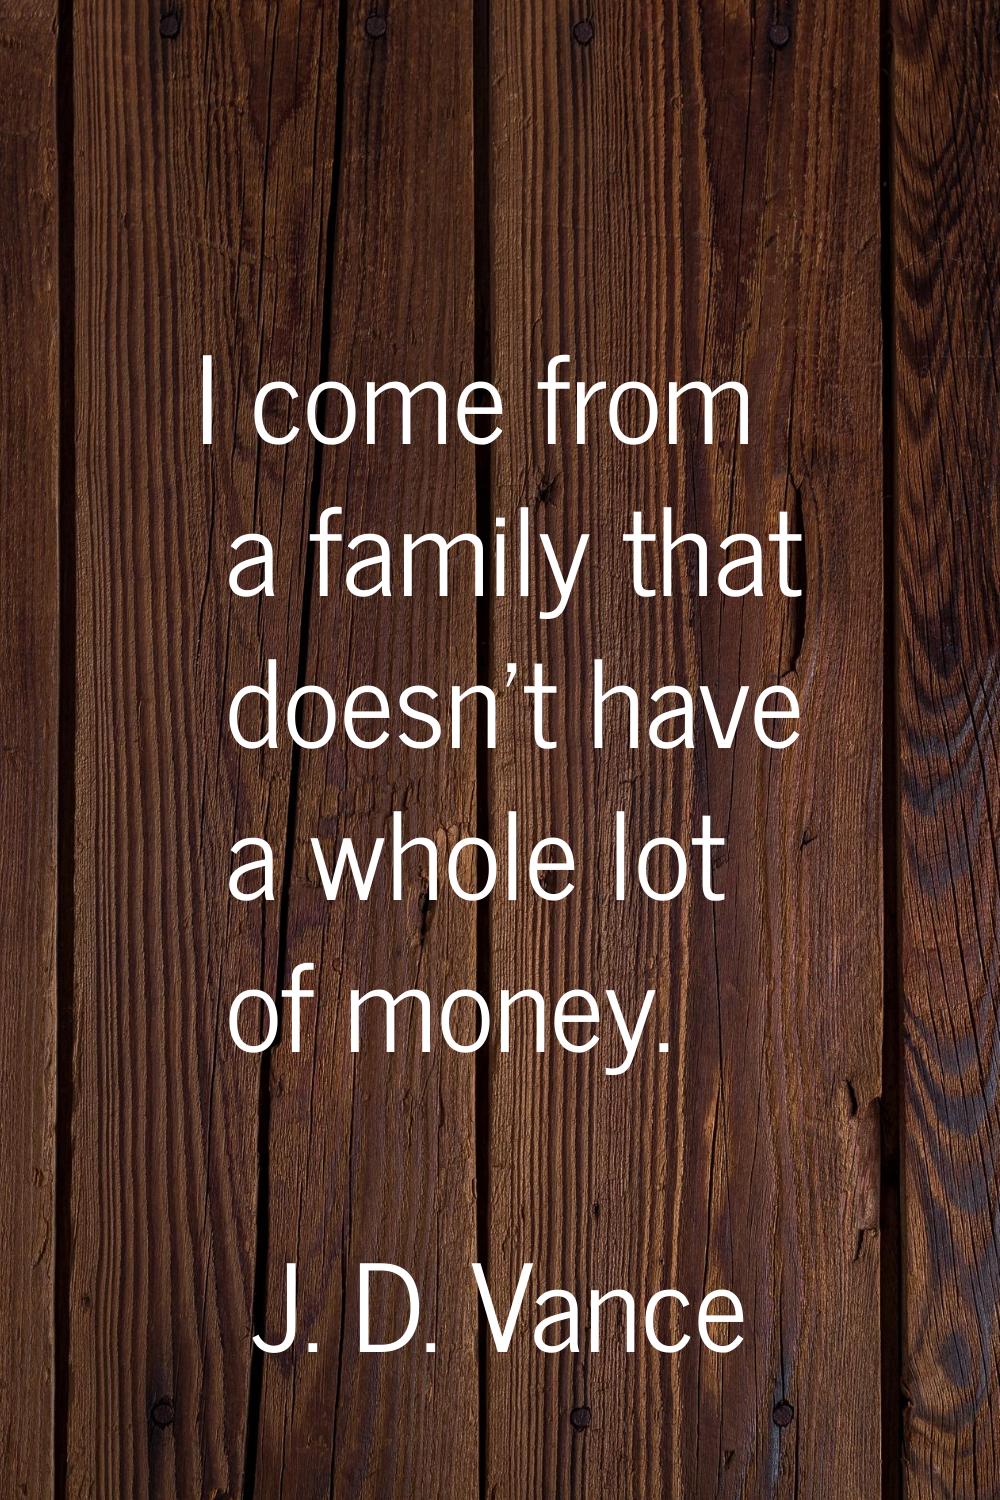 I come from a family that doesn't have a whole lot of money.